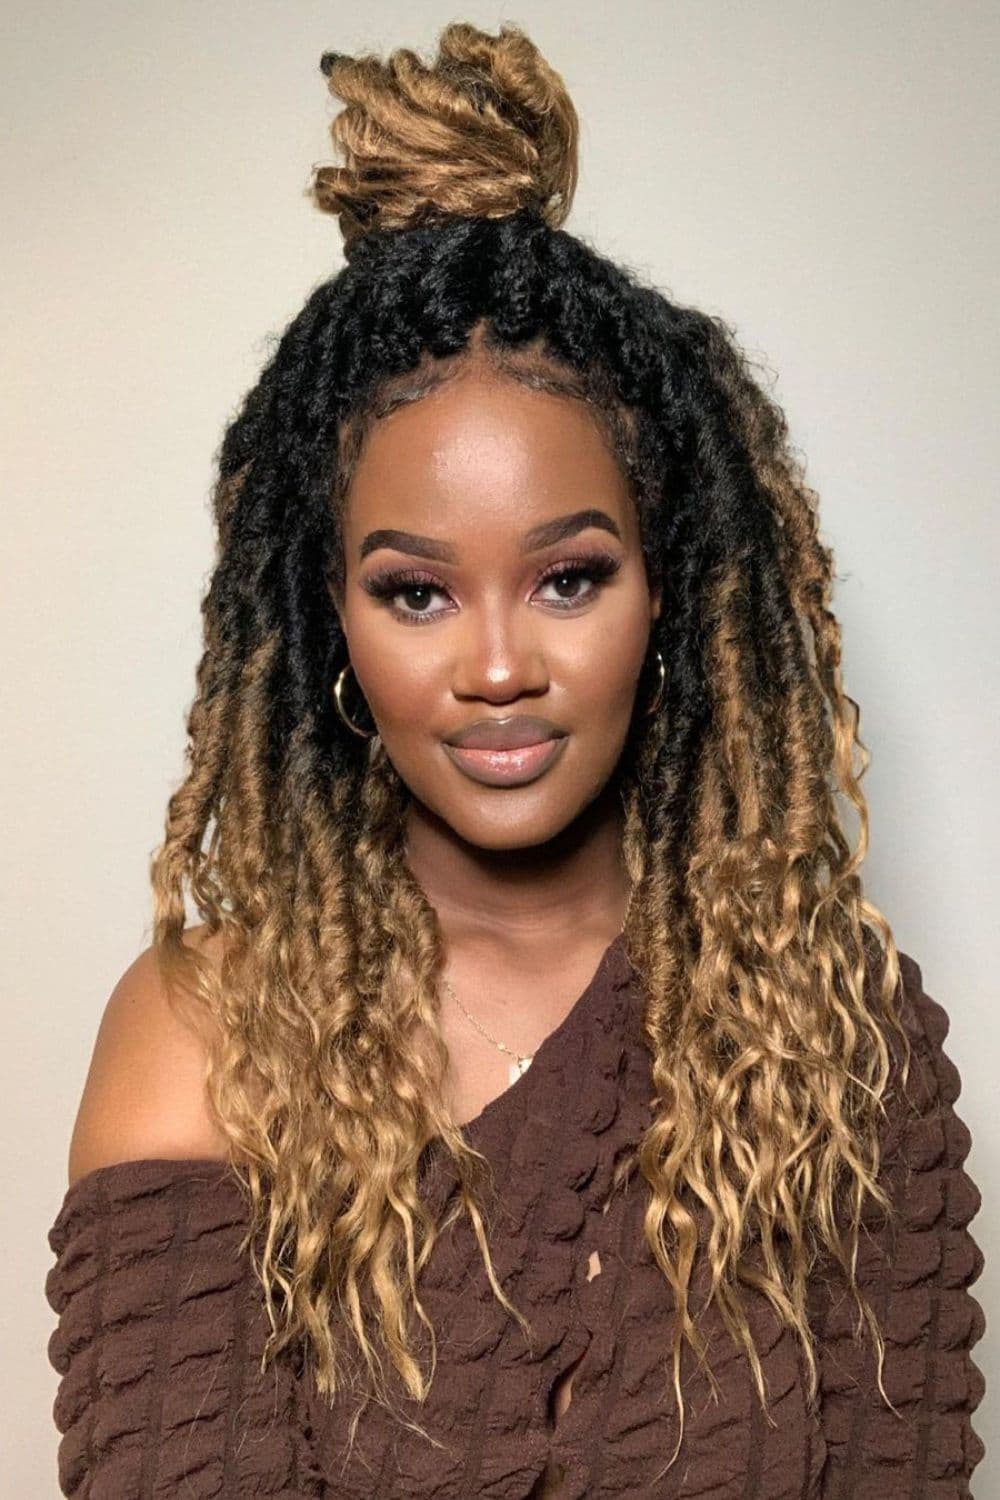 A woman in a brown off-shoulder blouse with half up half down ombre goddess locs.